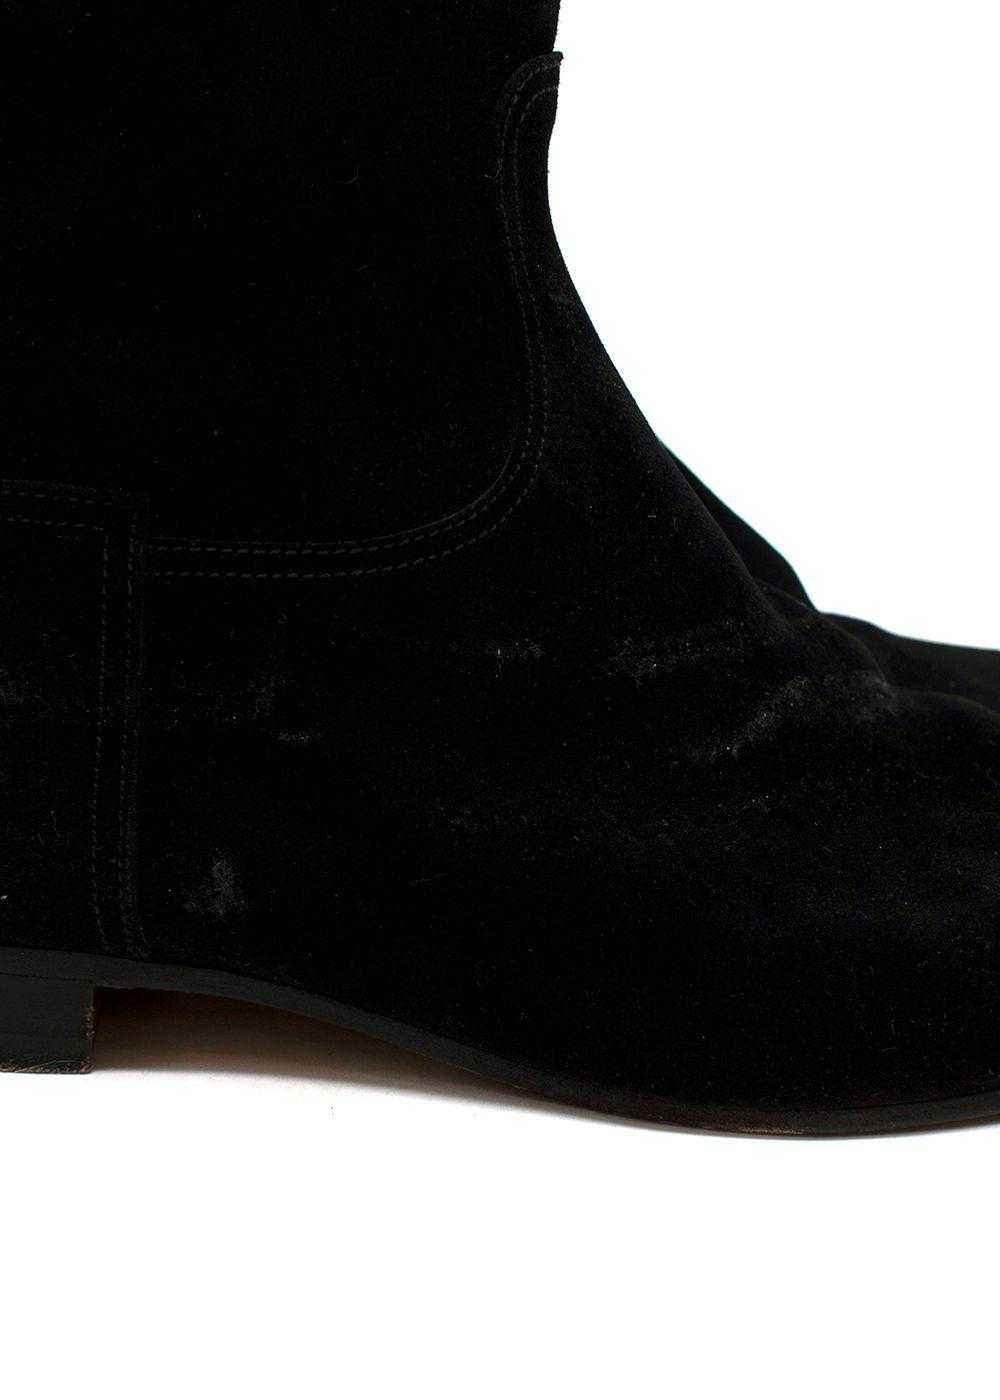 Managed by hewi Black Suede Jumping Boots - image 5